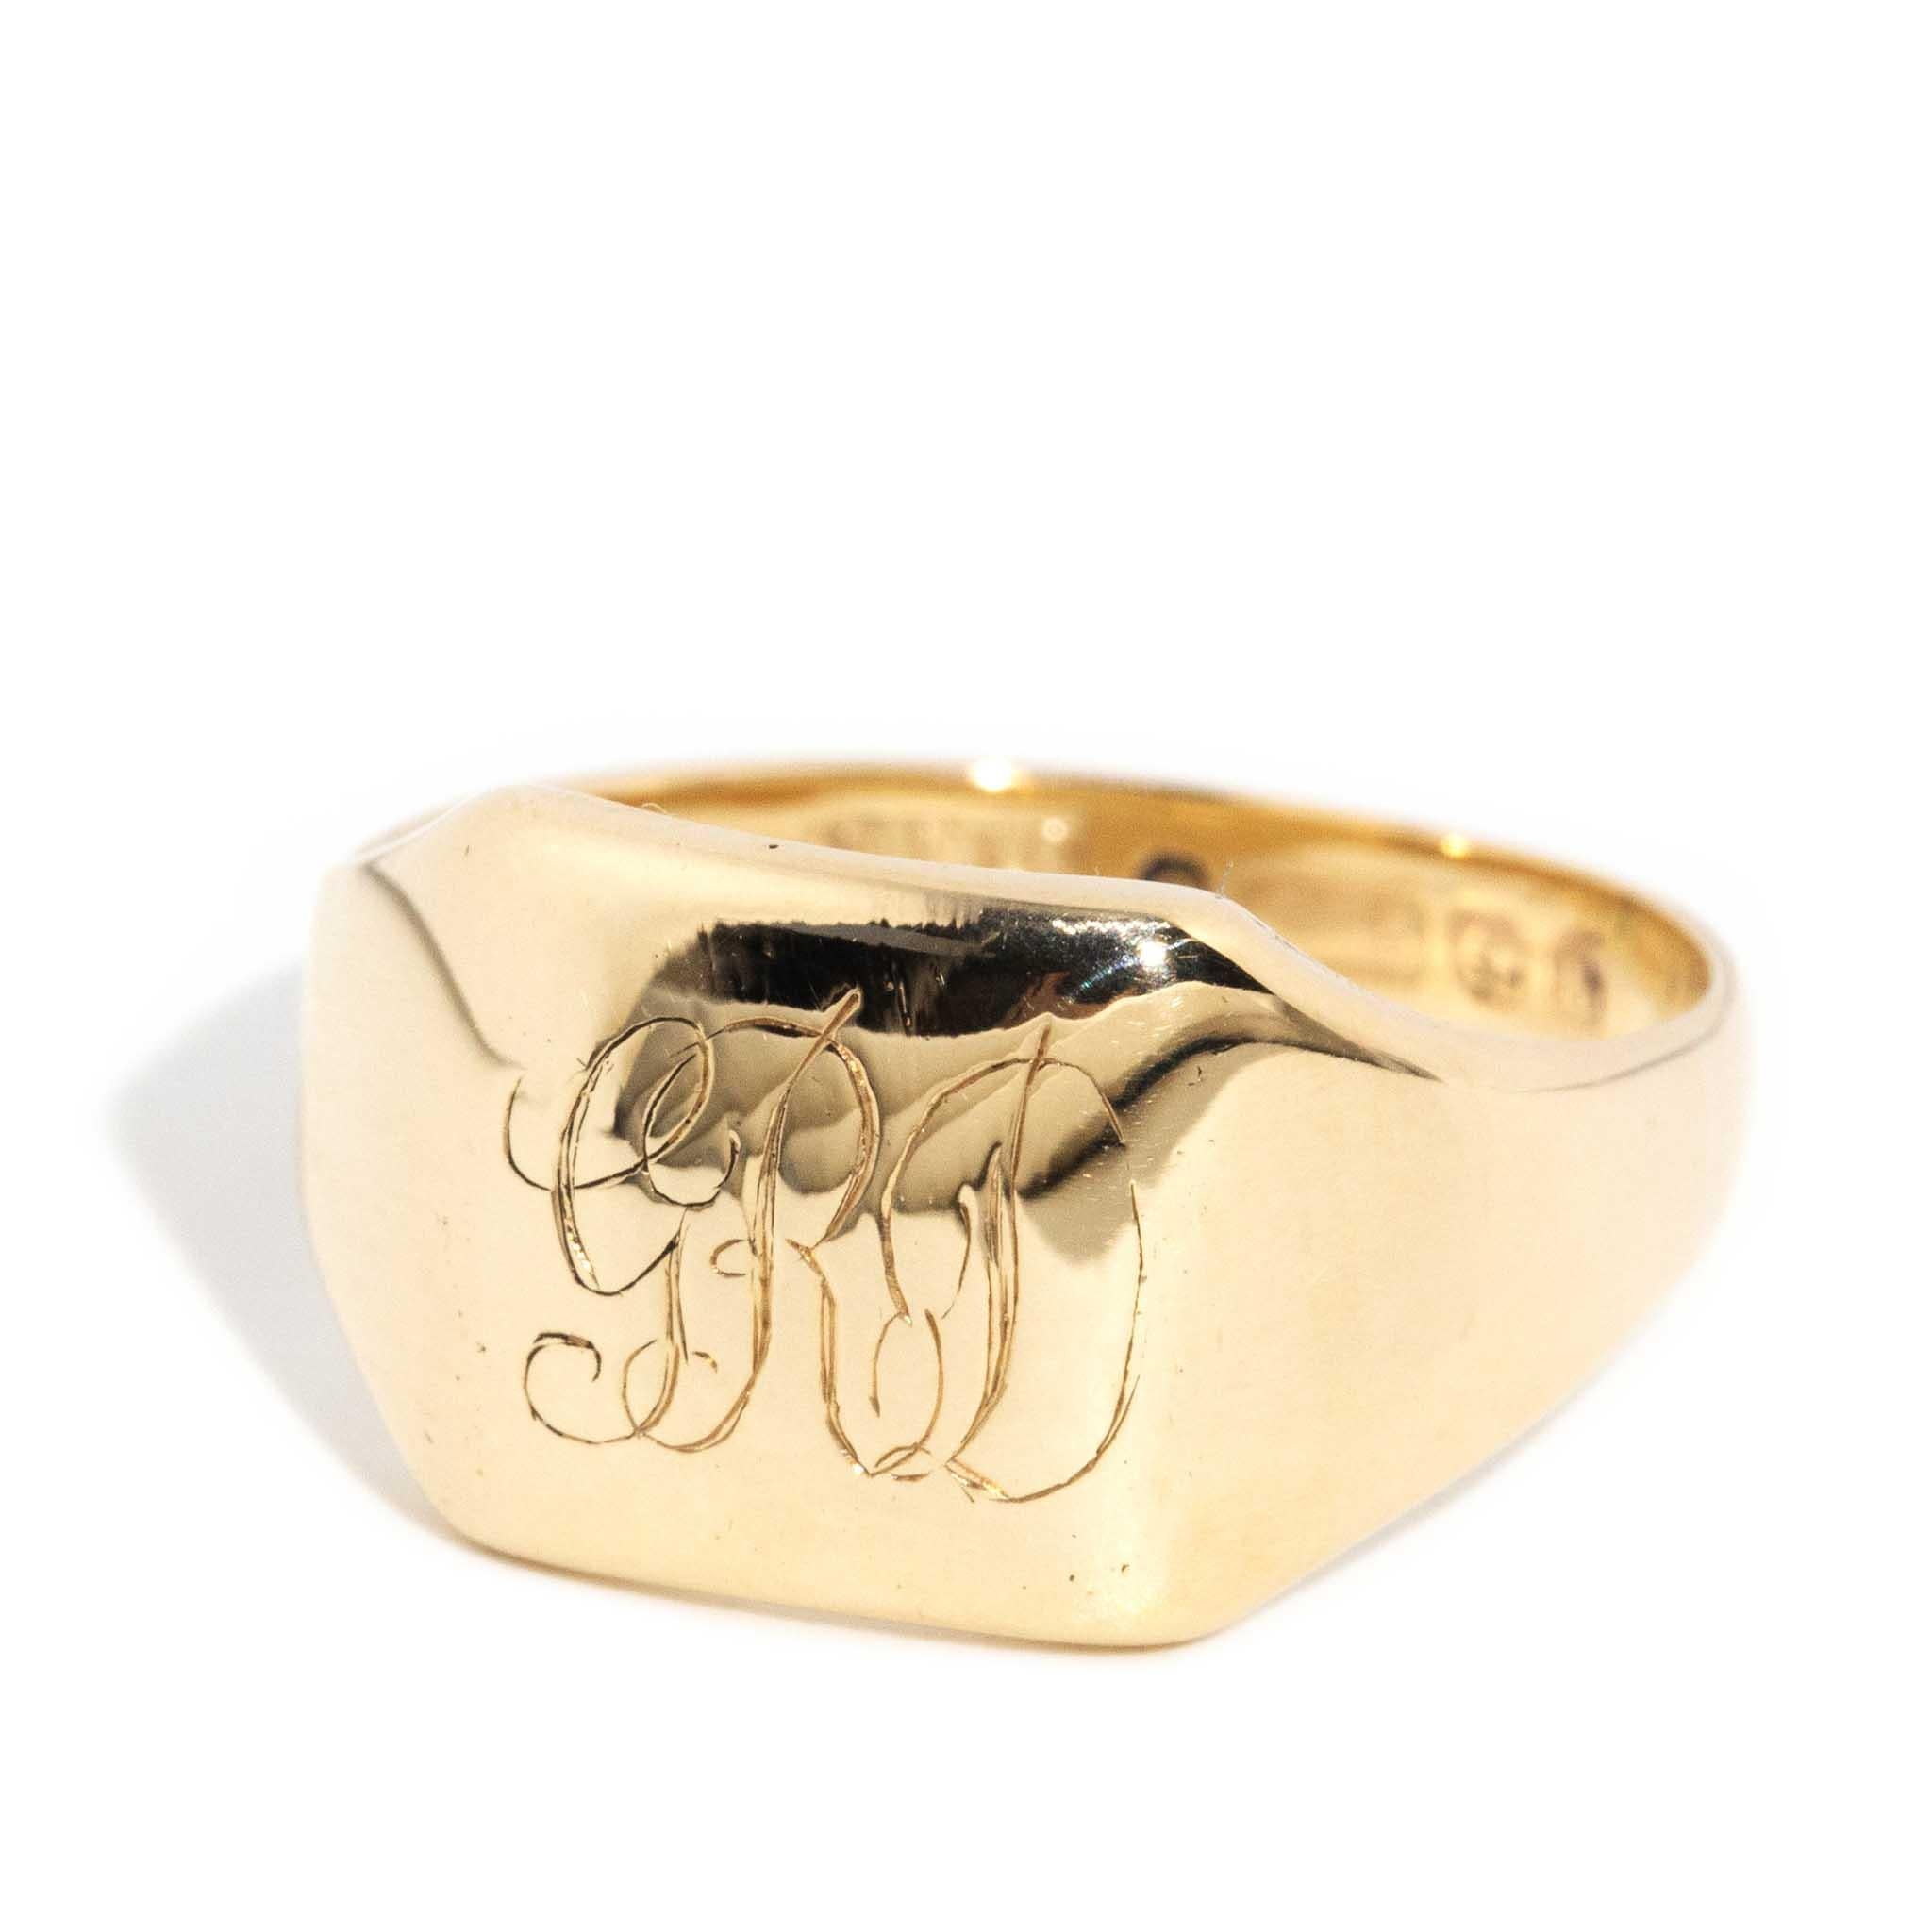 Vintage 1935 Hallmarked & Initialed Unisex Signet Ring 9 Carat Yellow Gold For Sale 3